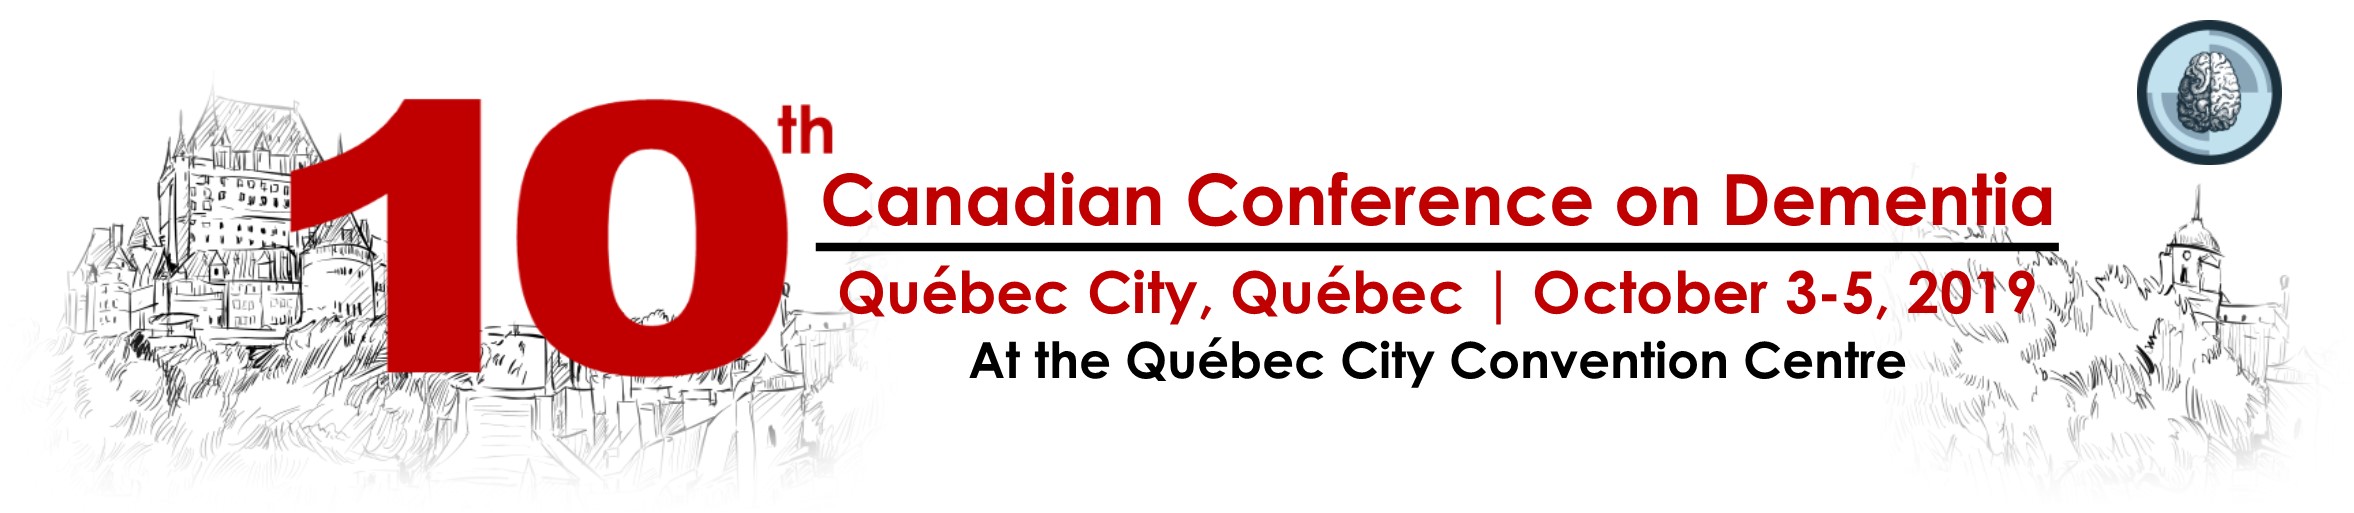 10th Canadian Conference on Dementia | Quebec City, Quebec - October 3-5, 2019 at the Quebec City Convention Centre